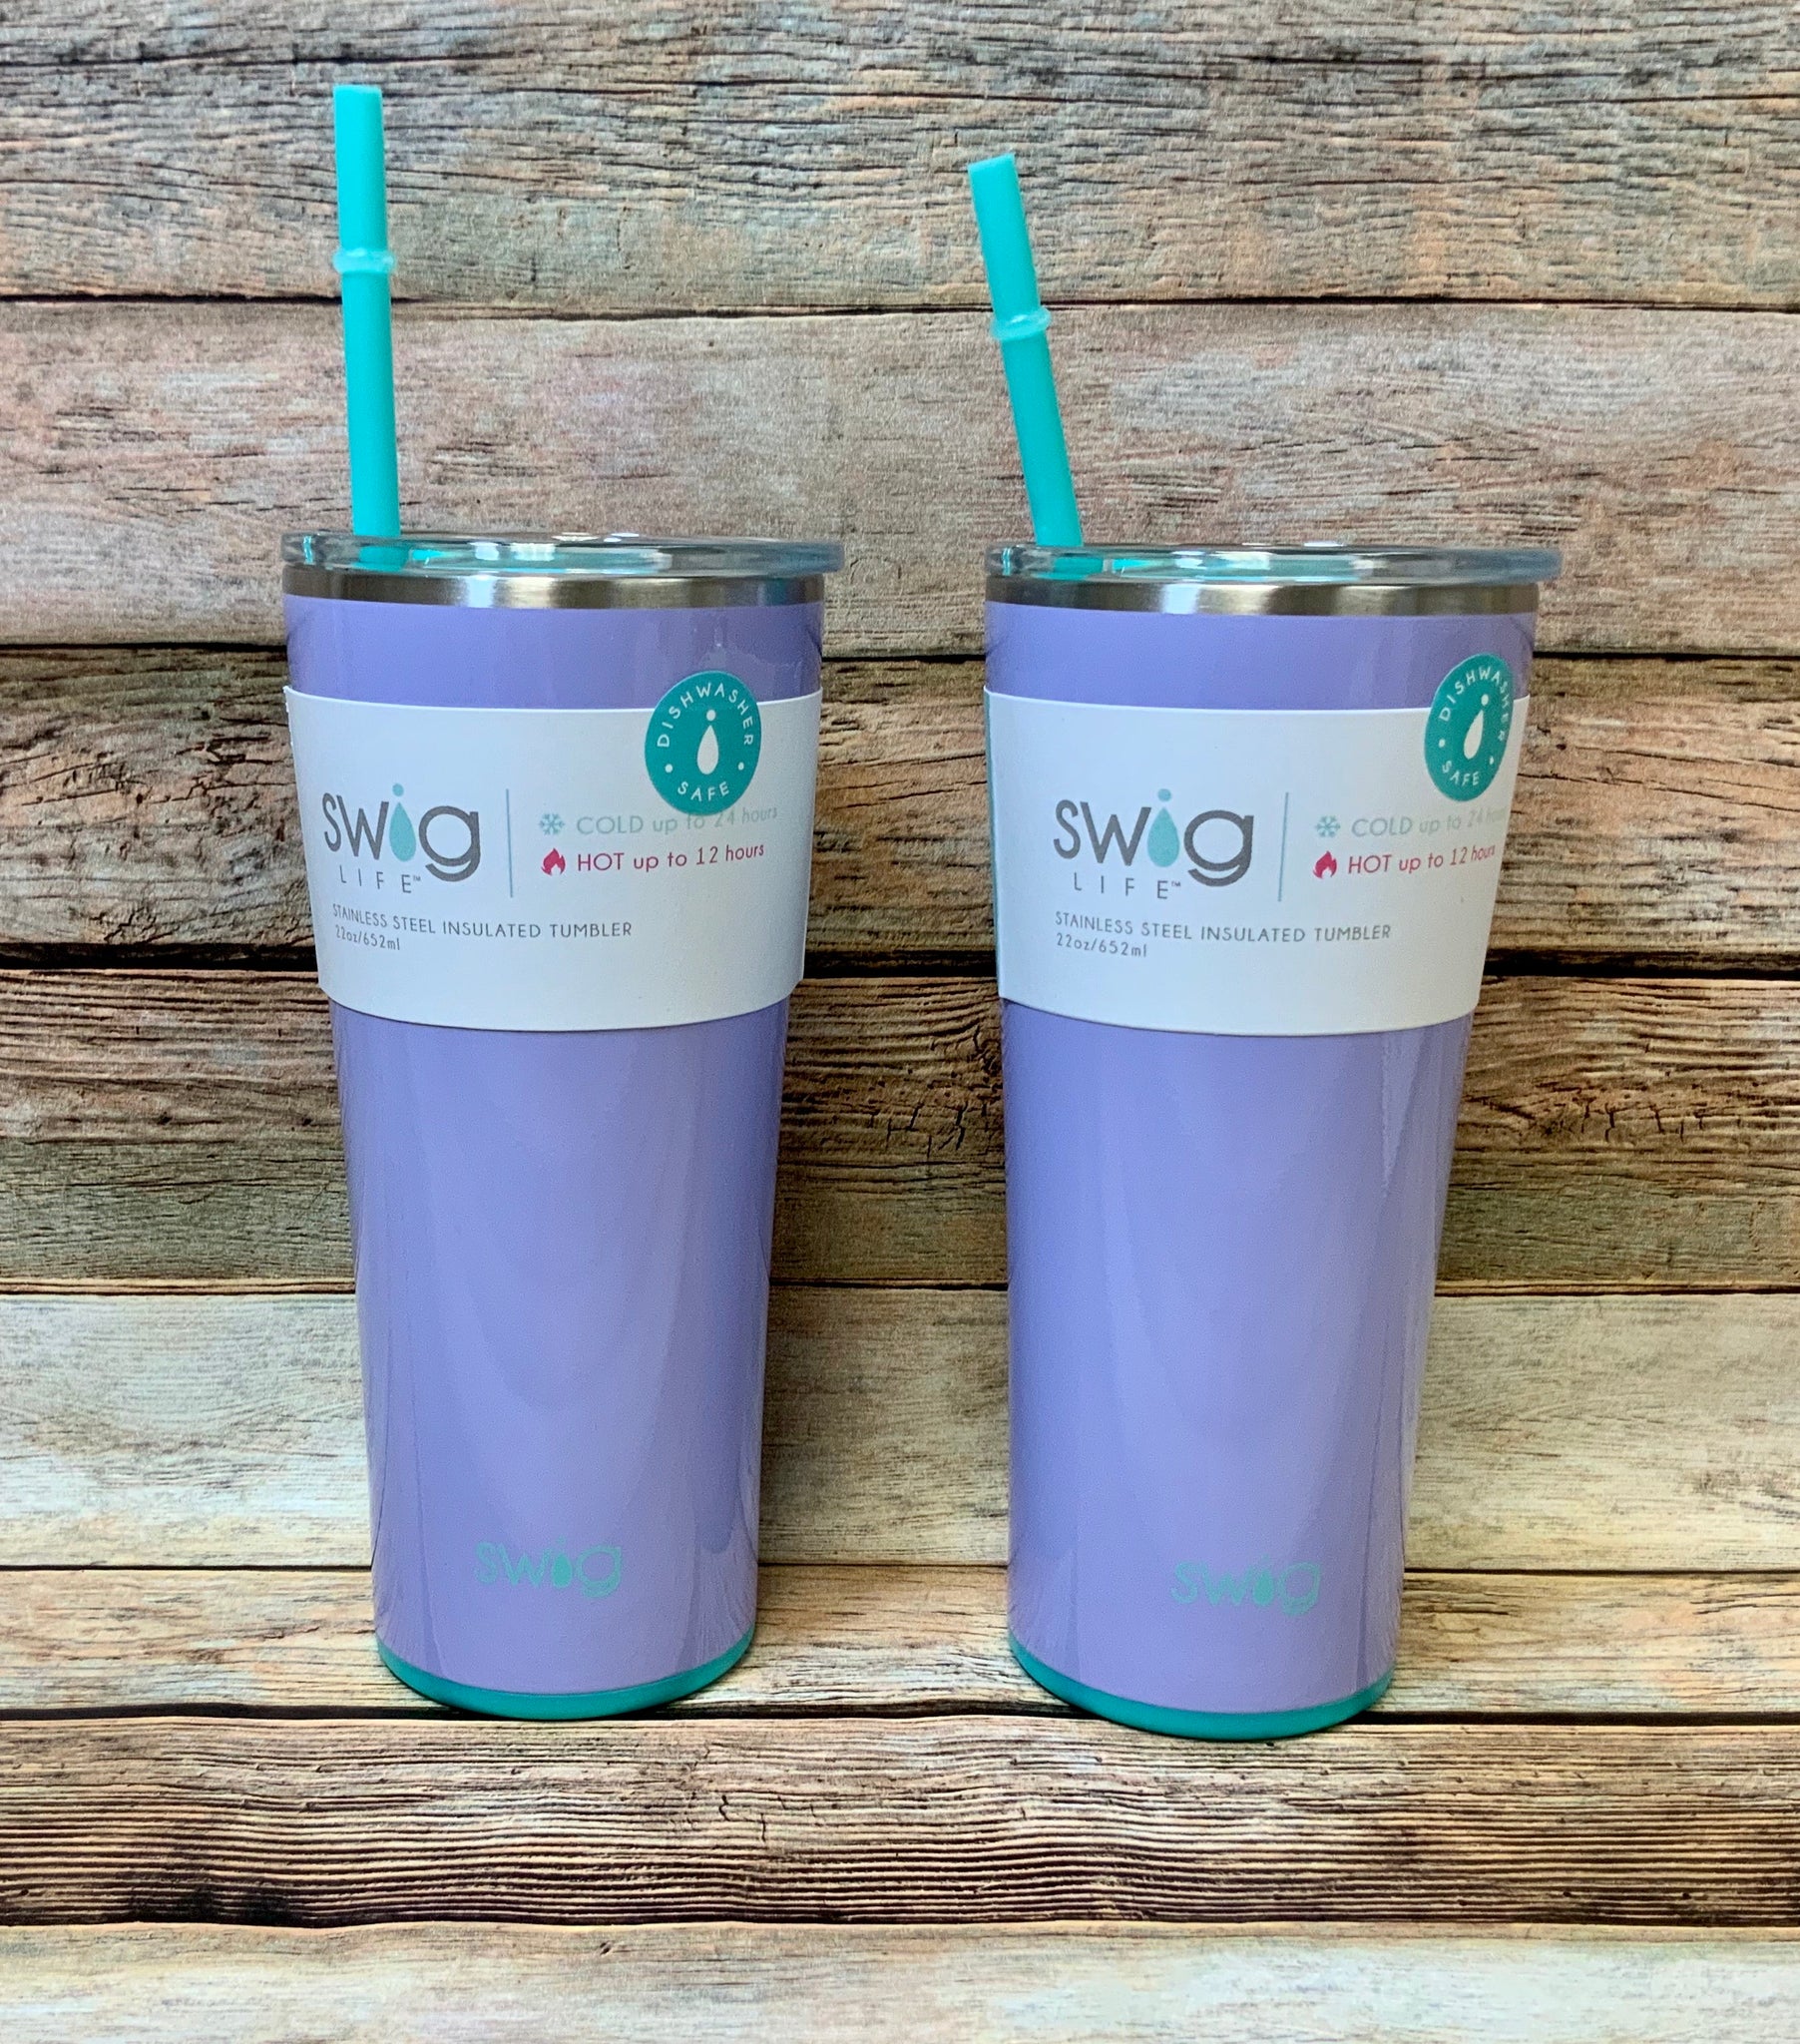 Extra SWIG Straws for 32oz and 22oz Tumblers -  Denmark